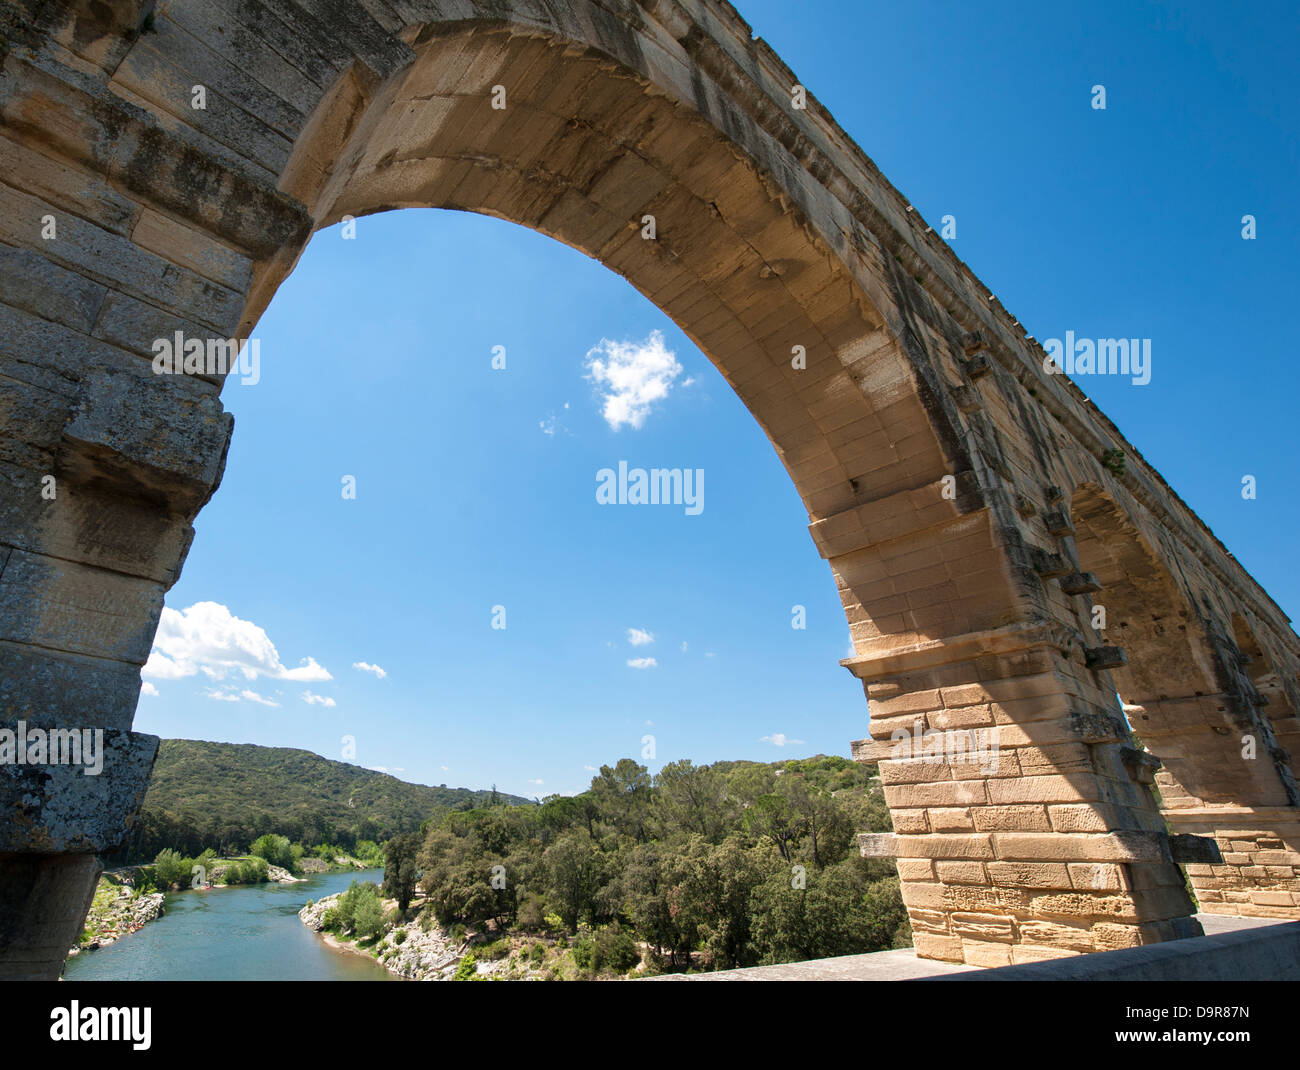 Arc of UNESCO World Heritage Pont-du-Gard, a Roman aqueduct spanning the Gard river near Nîmes in southern France Stock Photo